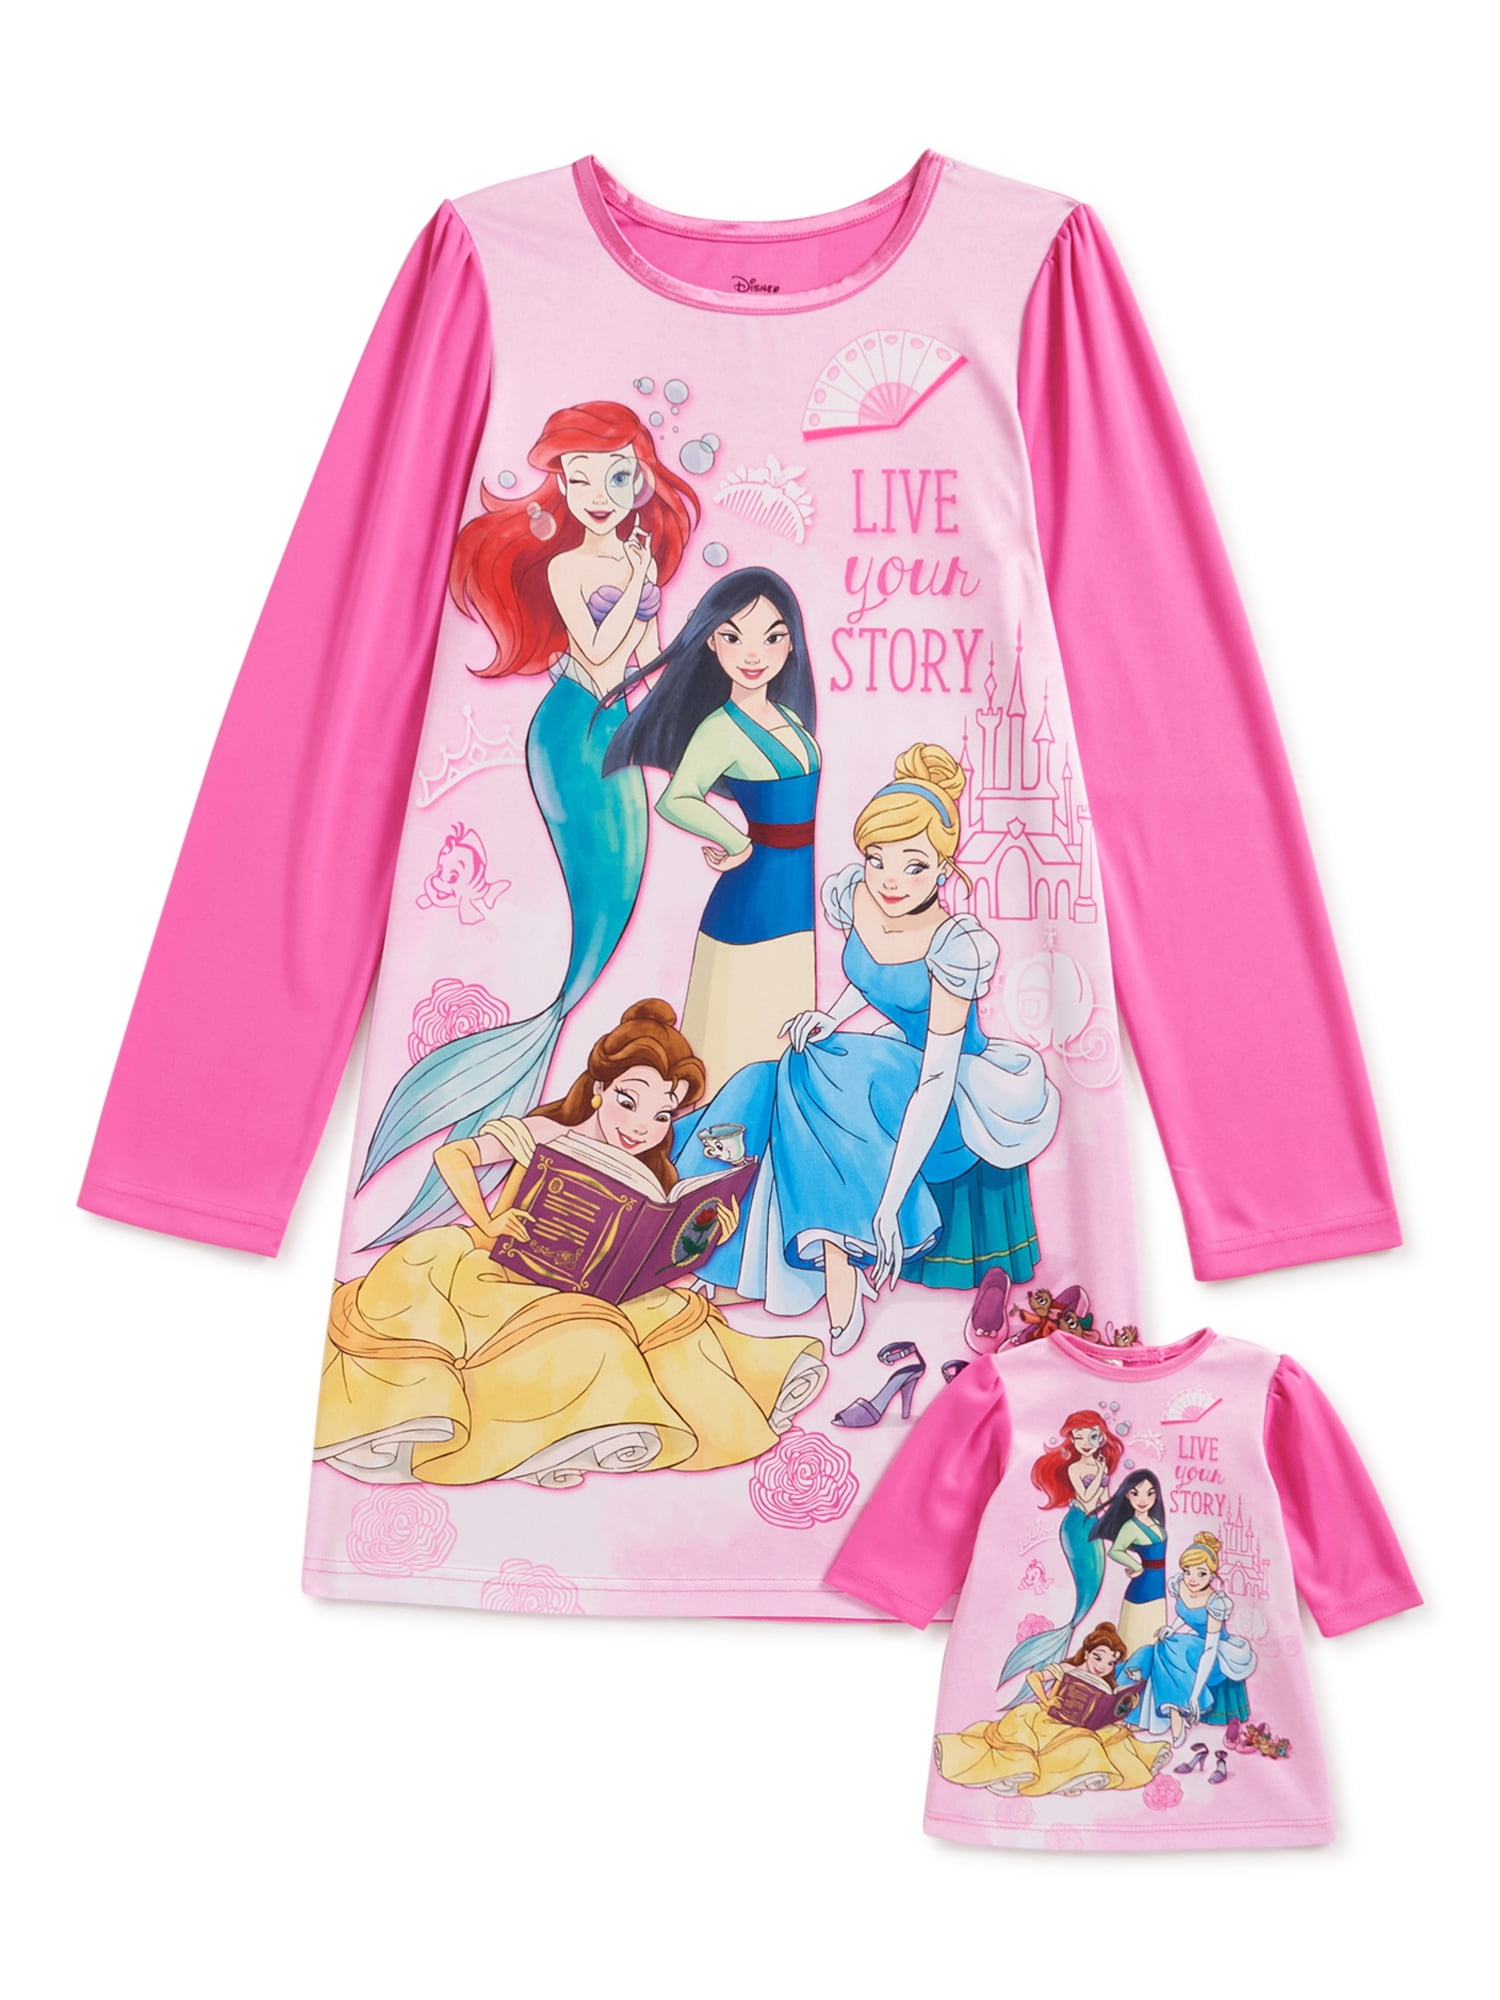 2 to Choose From Sizes 18 months-5 years Girl's CINDERELLA Pyjamas /PJs 